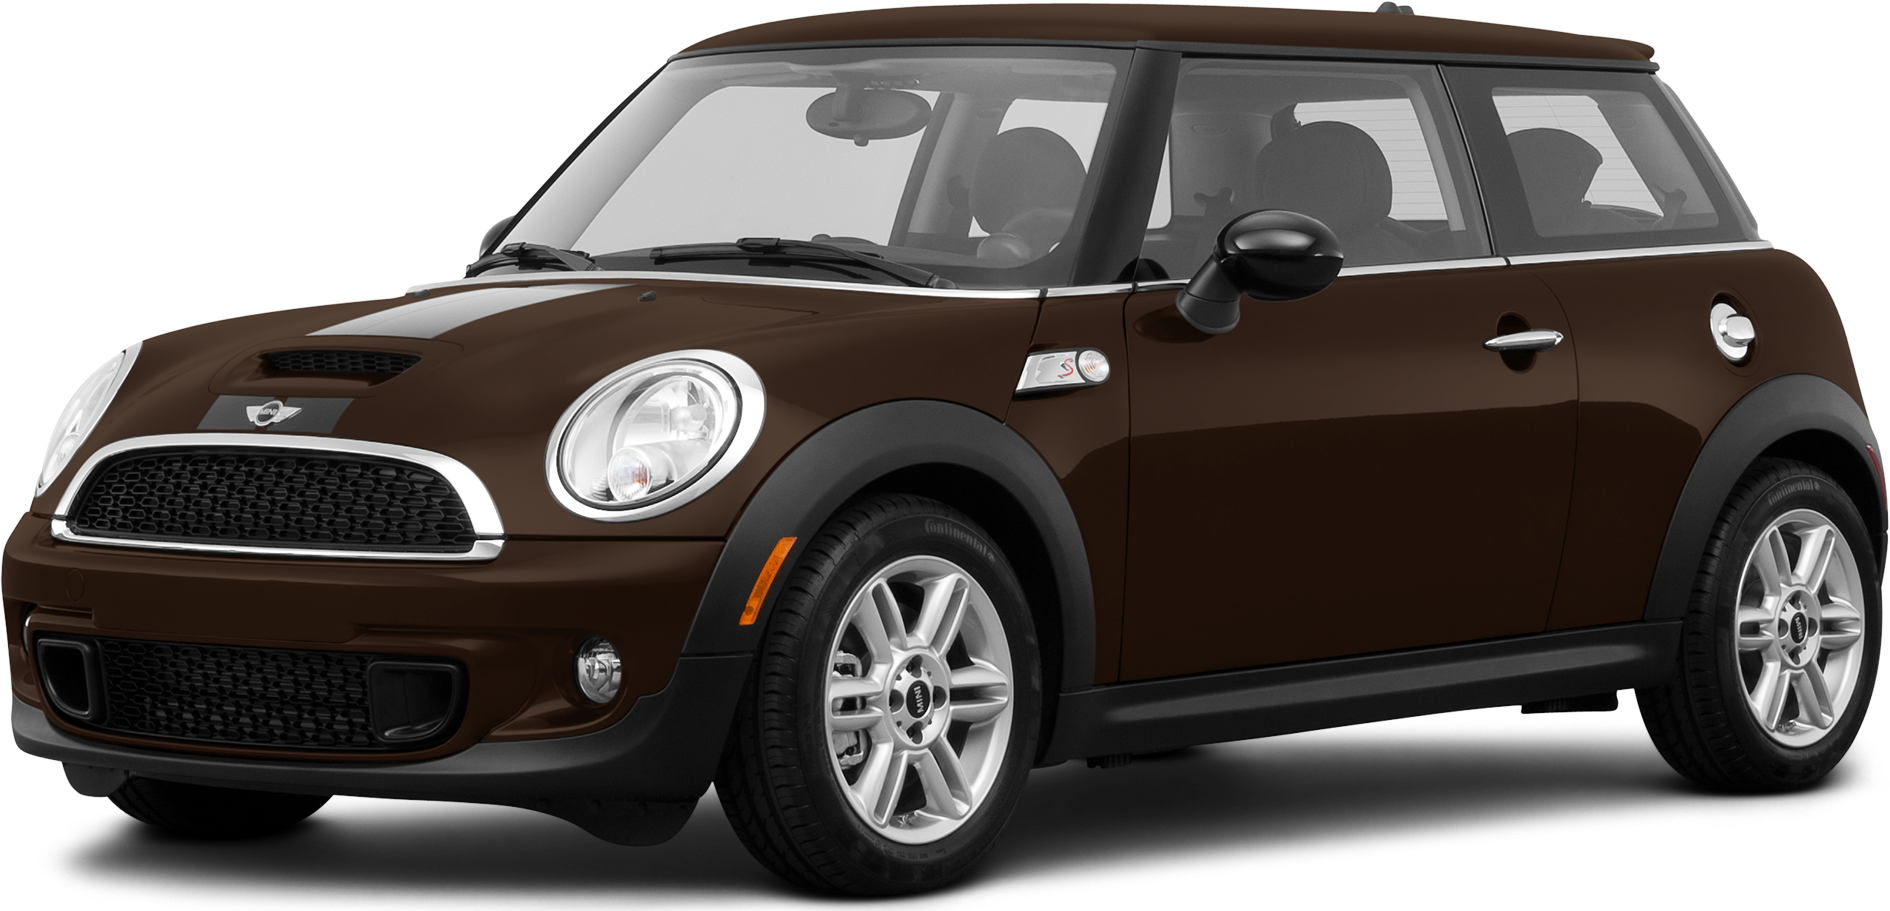 Is a Used 2007-2013 R56 Mini Cooper Reliable?